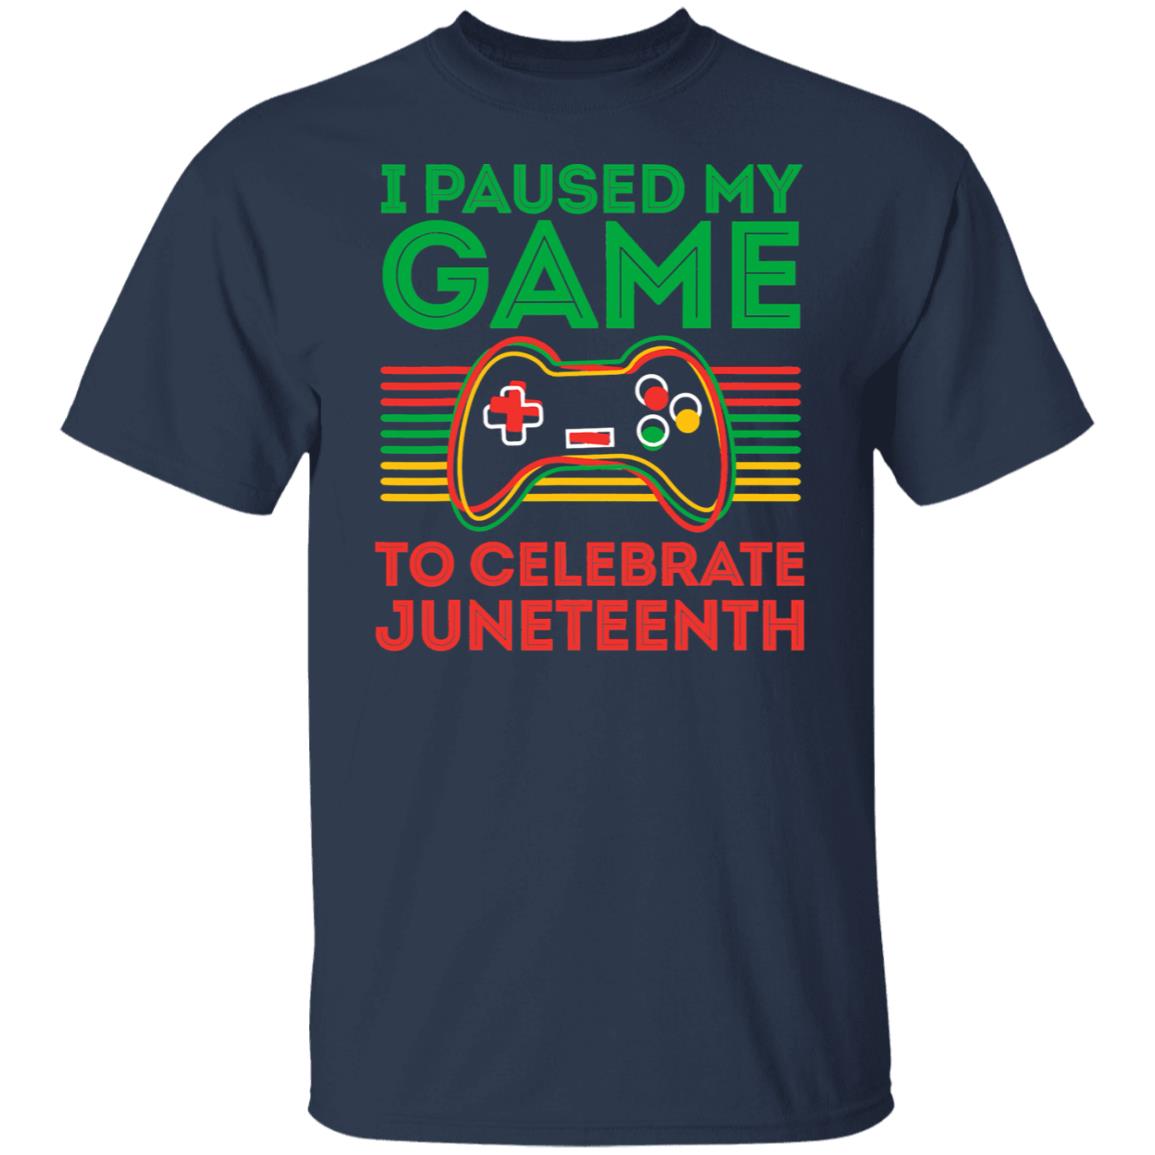 Juneteenth Gamer I paused my game to celebrate Juneteenth T-Shirt